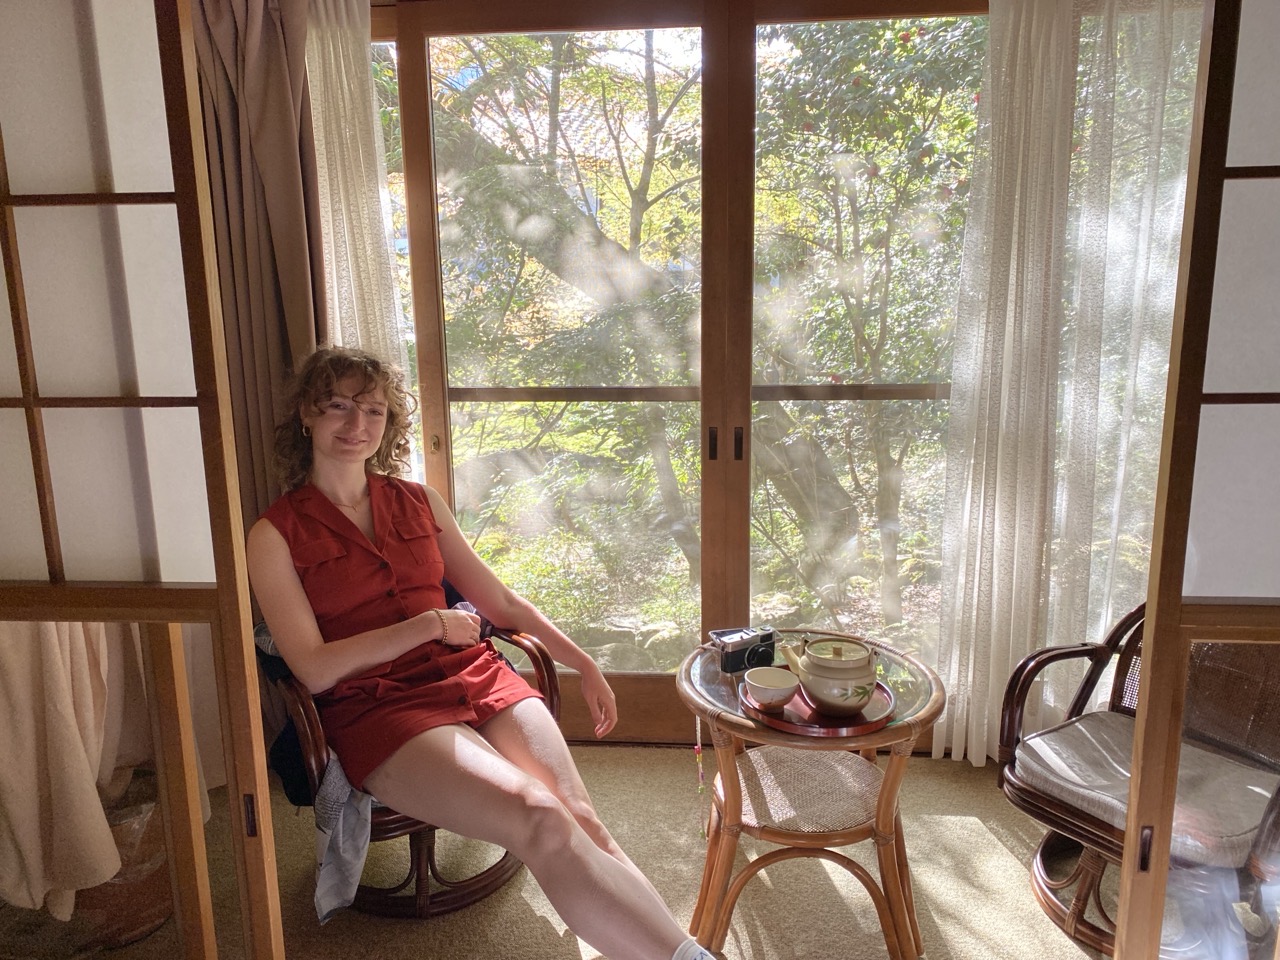 Lucy in the sunshine in the ryokan looking radiant as usual